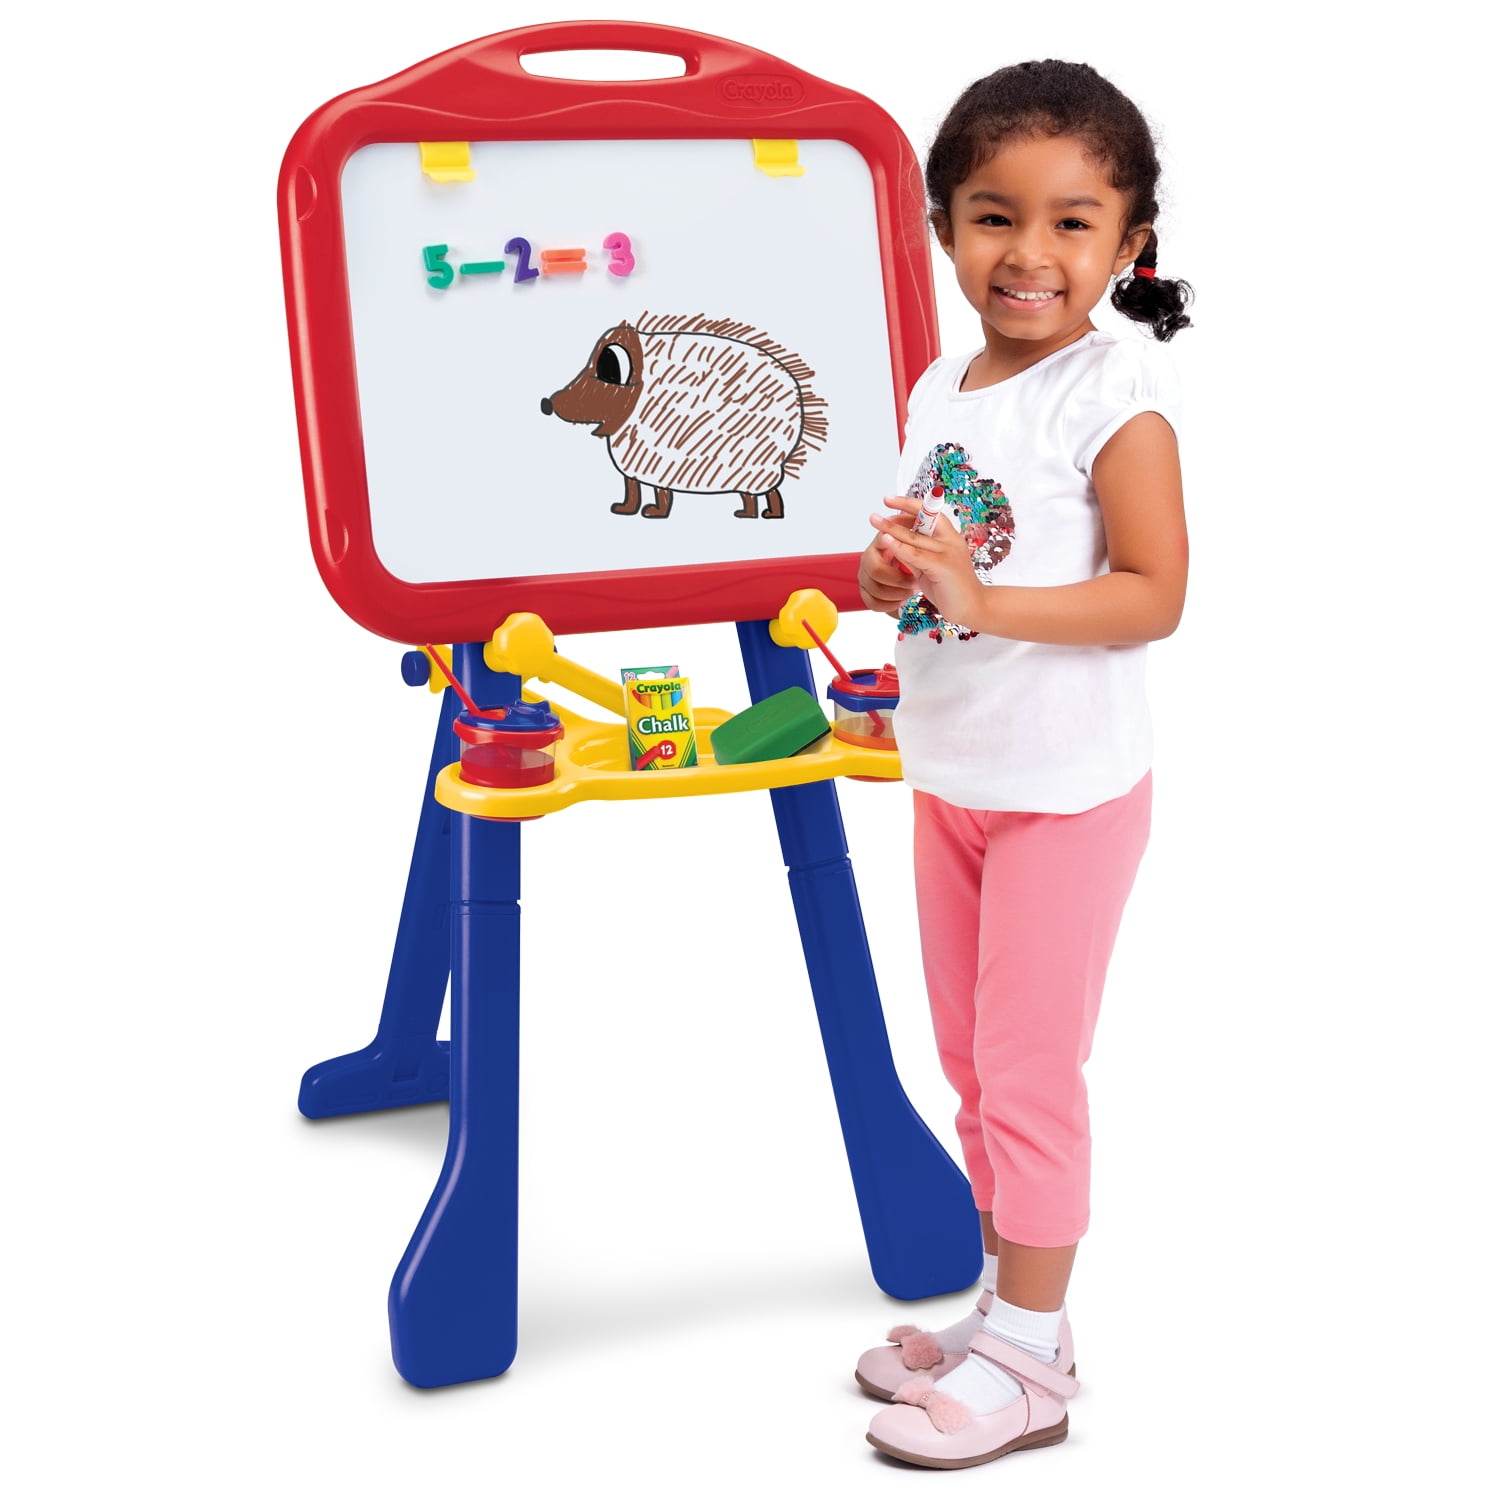 Crayola Deluxe Kids Wooden Art Easel & Supplies for Kids, Ages 3, 4, 5